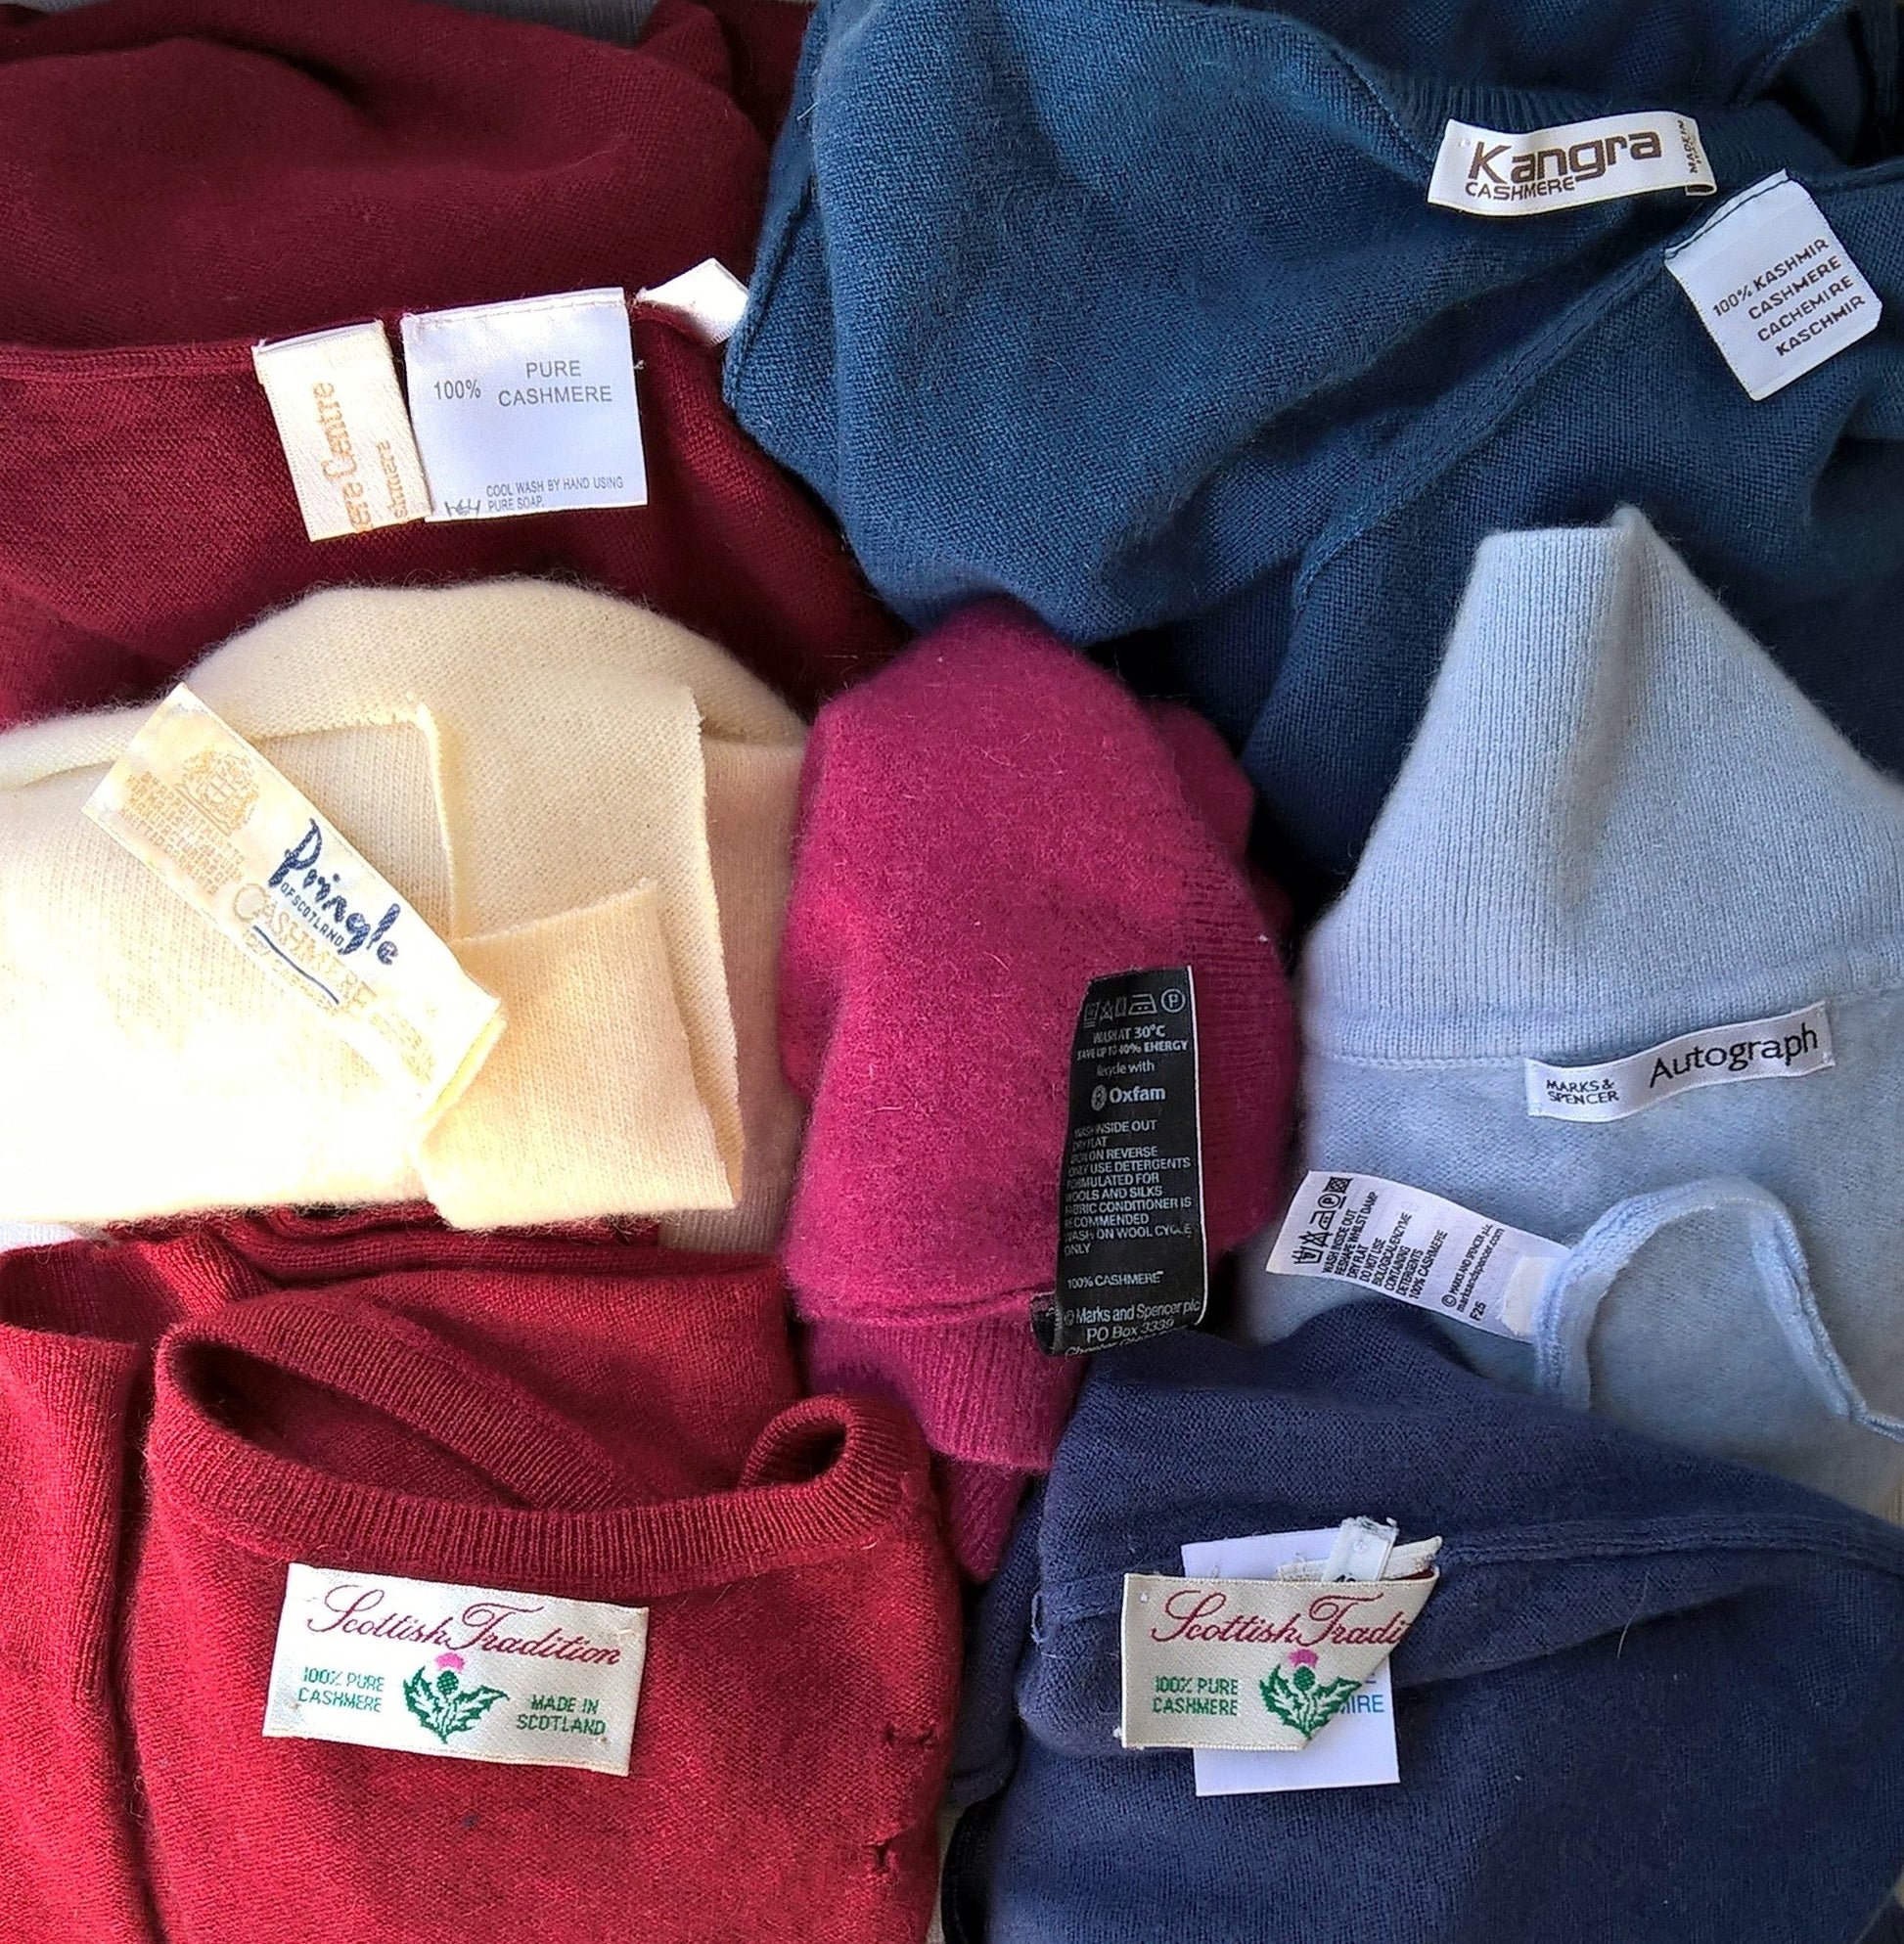 Pure cashmere knitwear washed and ready for upcycling